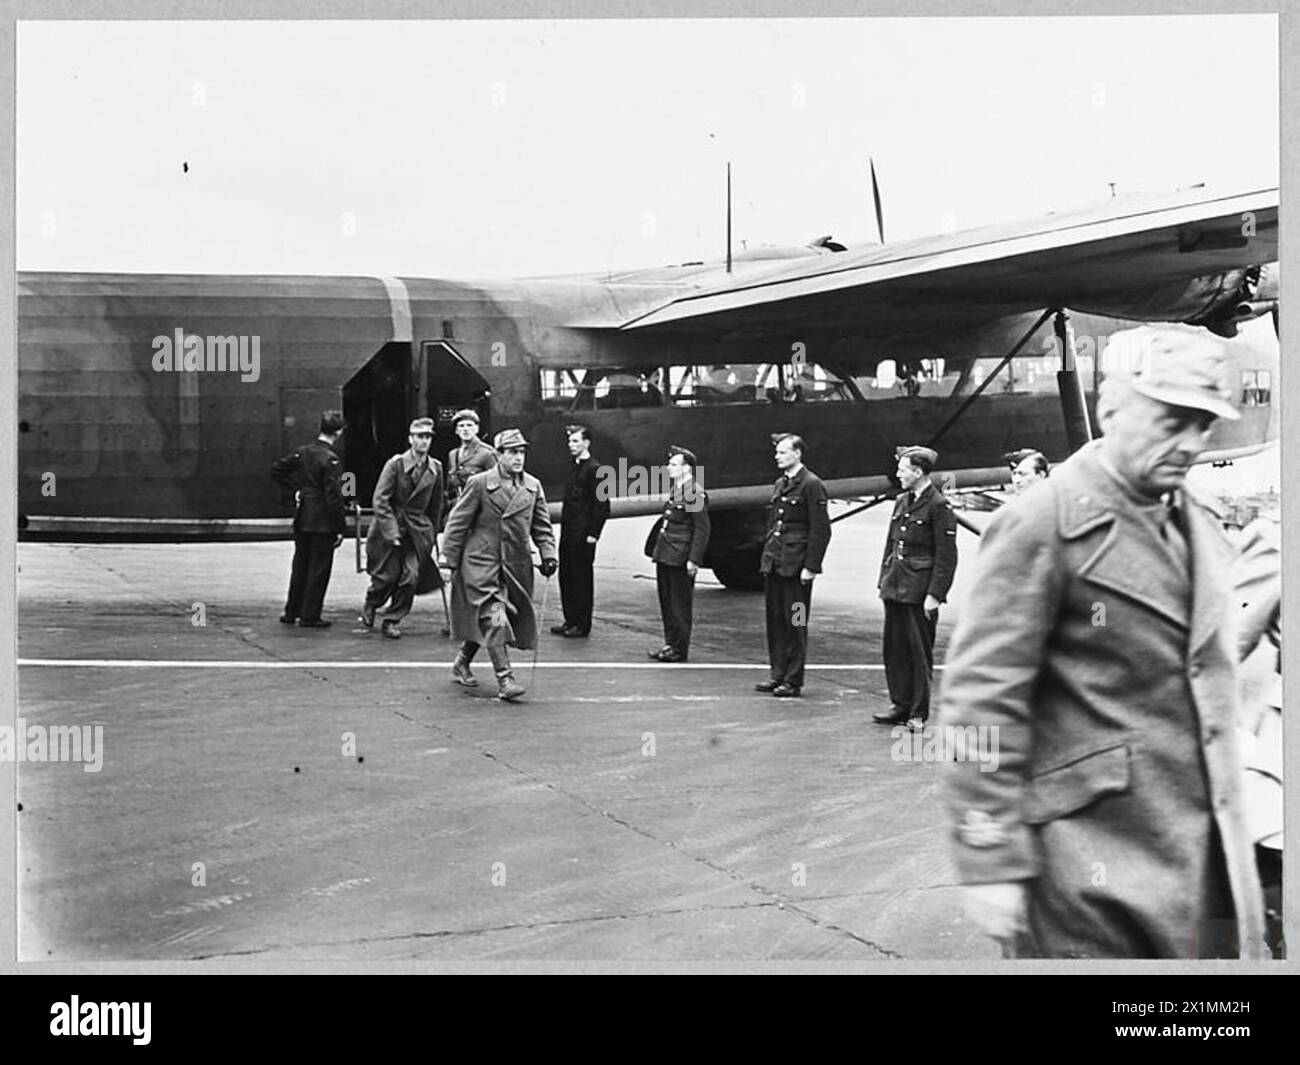 AXIS GENERALS ARRIVE IN SOUTH OF ENGLAND AS PRISONERS OF WAR. - 9958. Picture (issued 1943) shows - Brigadier General Mancinelli [Italian Army] in foreground and Colonel von Hulsen who commanded German 21st Armoured Division, leaving Harrow aircraft on arrival at an airfield in Southern England, Royal Air Force Stock Photo